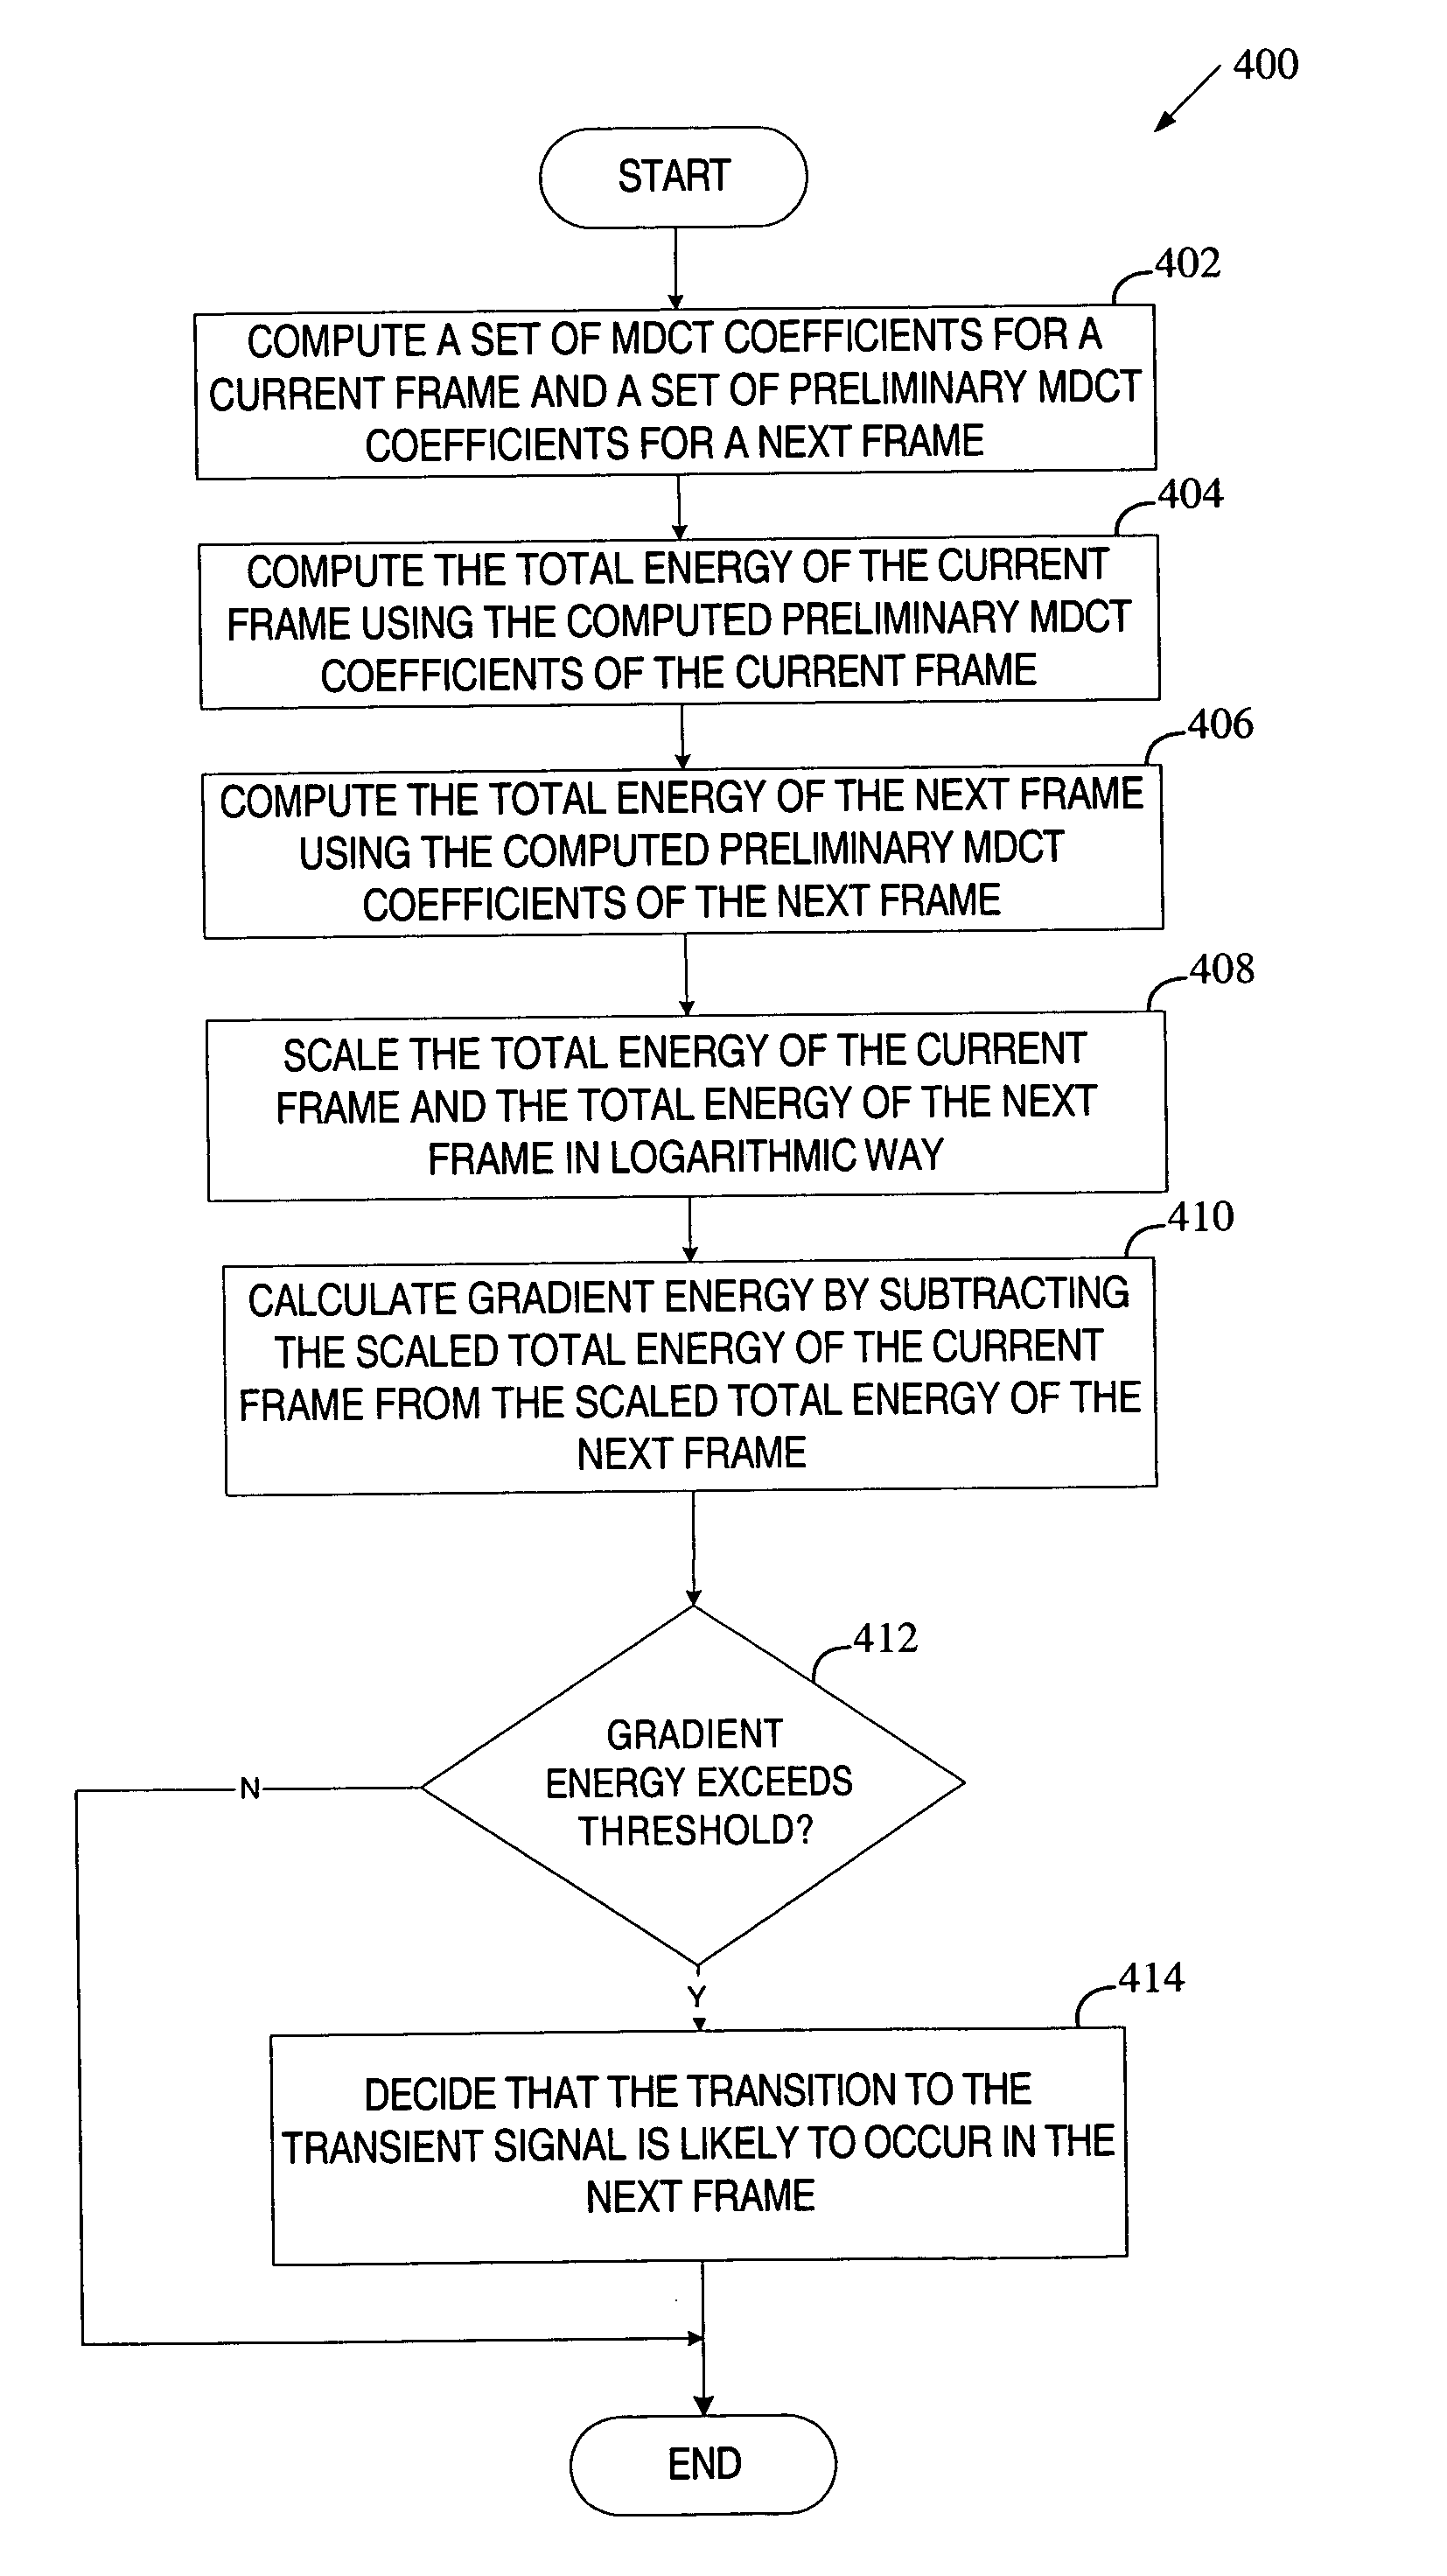 Method of making a window type decision based on MDCT data in audio encoding